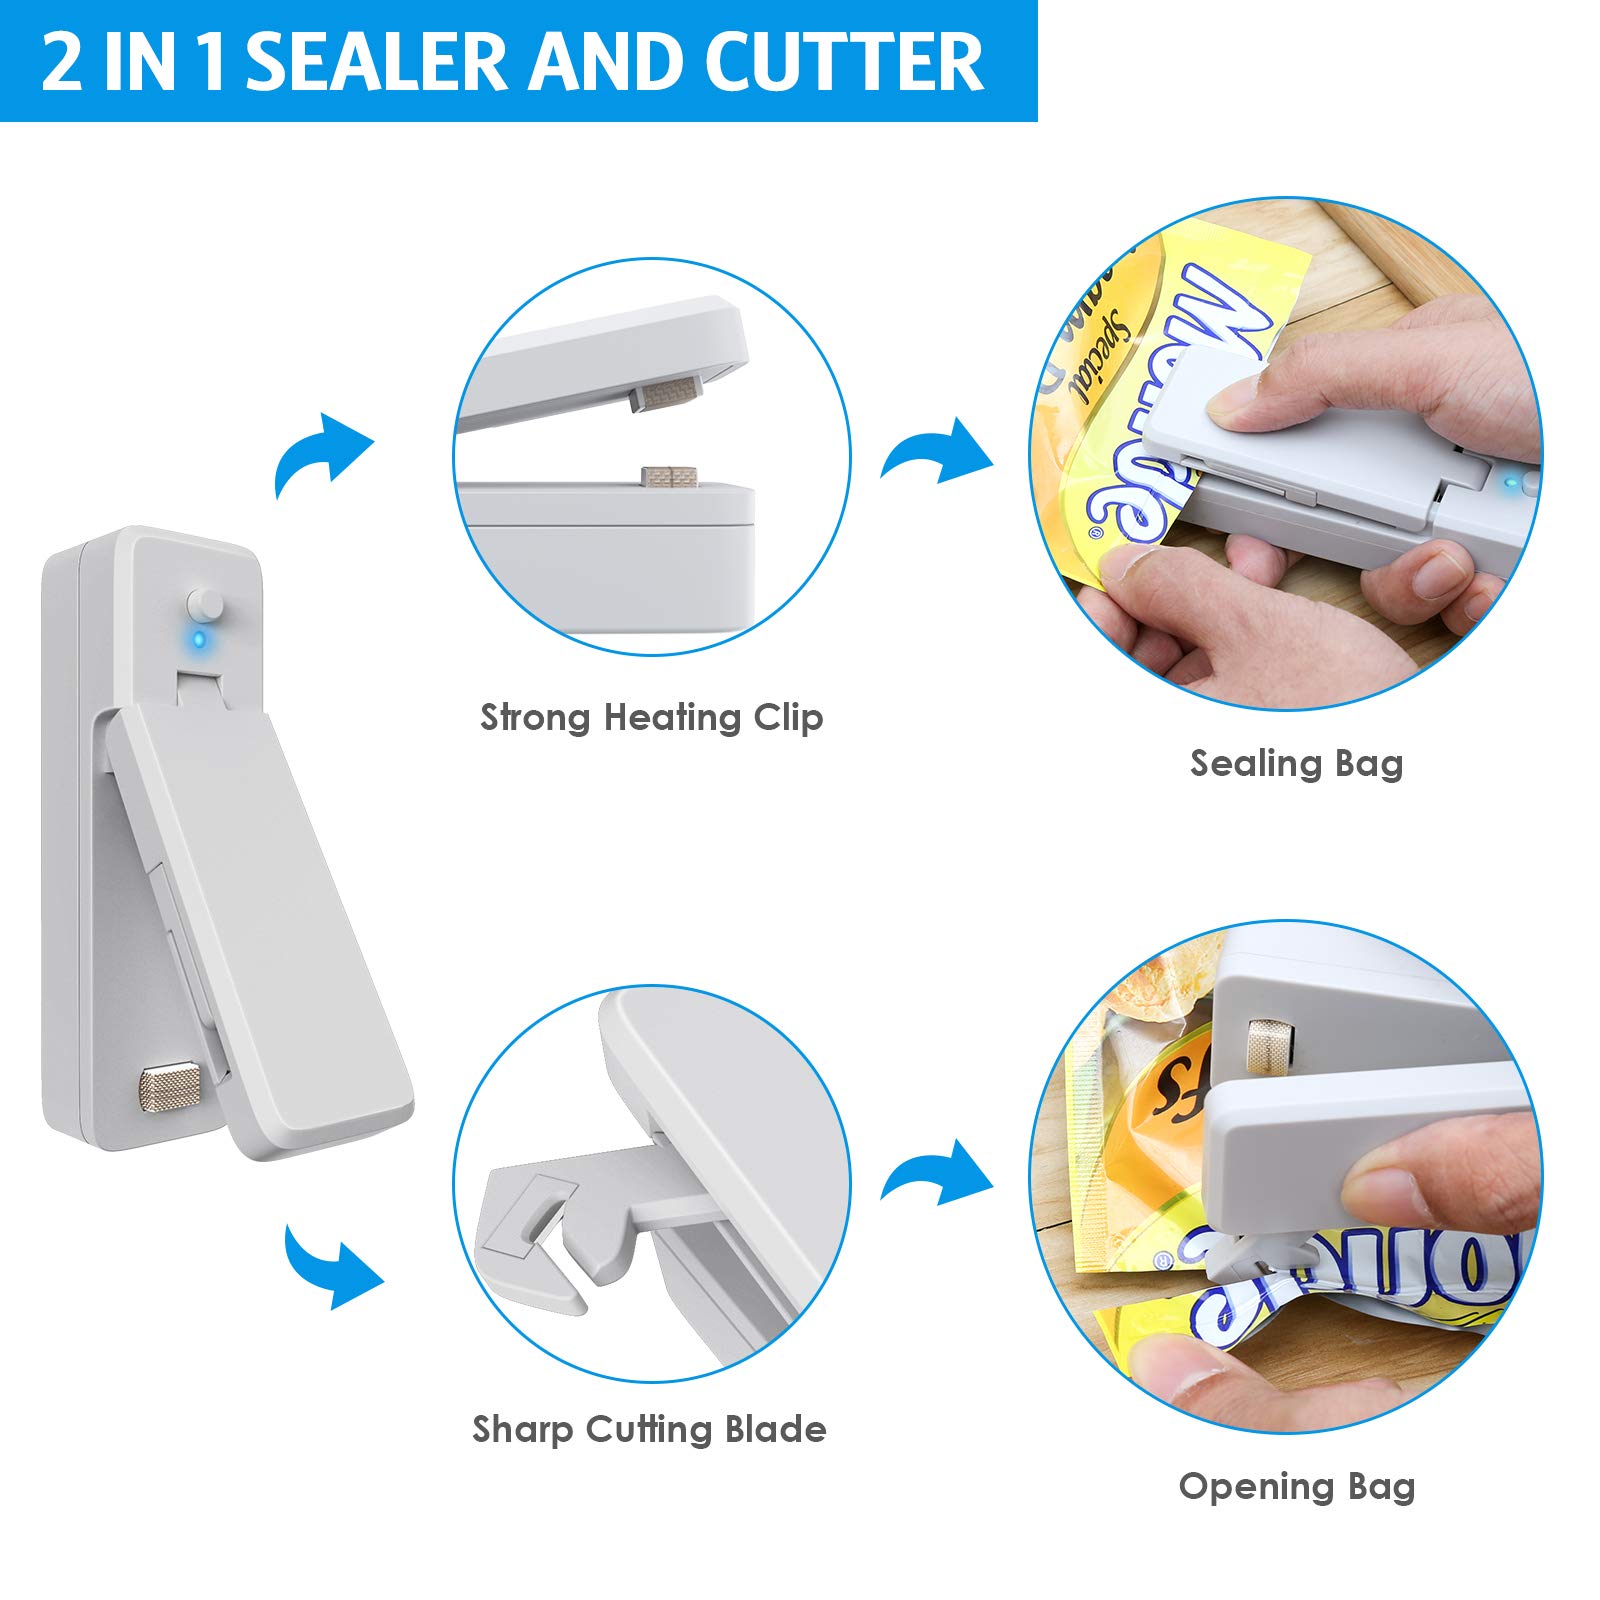 Ankilo Mini Bag Sealer 2 Pack, 2 in 1 Rechargeable Heat Sealer, Portable Bag Sealer and Cutter for Plastic Bags Snacks, Outdoor Picnic Campaign, Food Storage, White